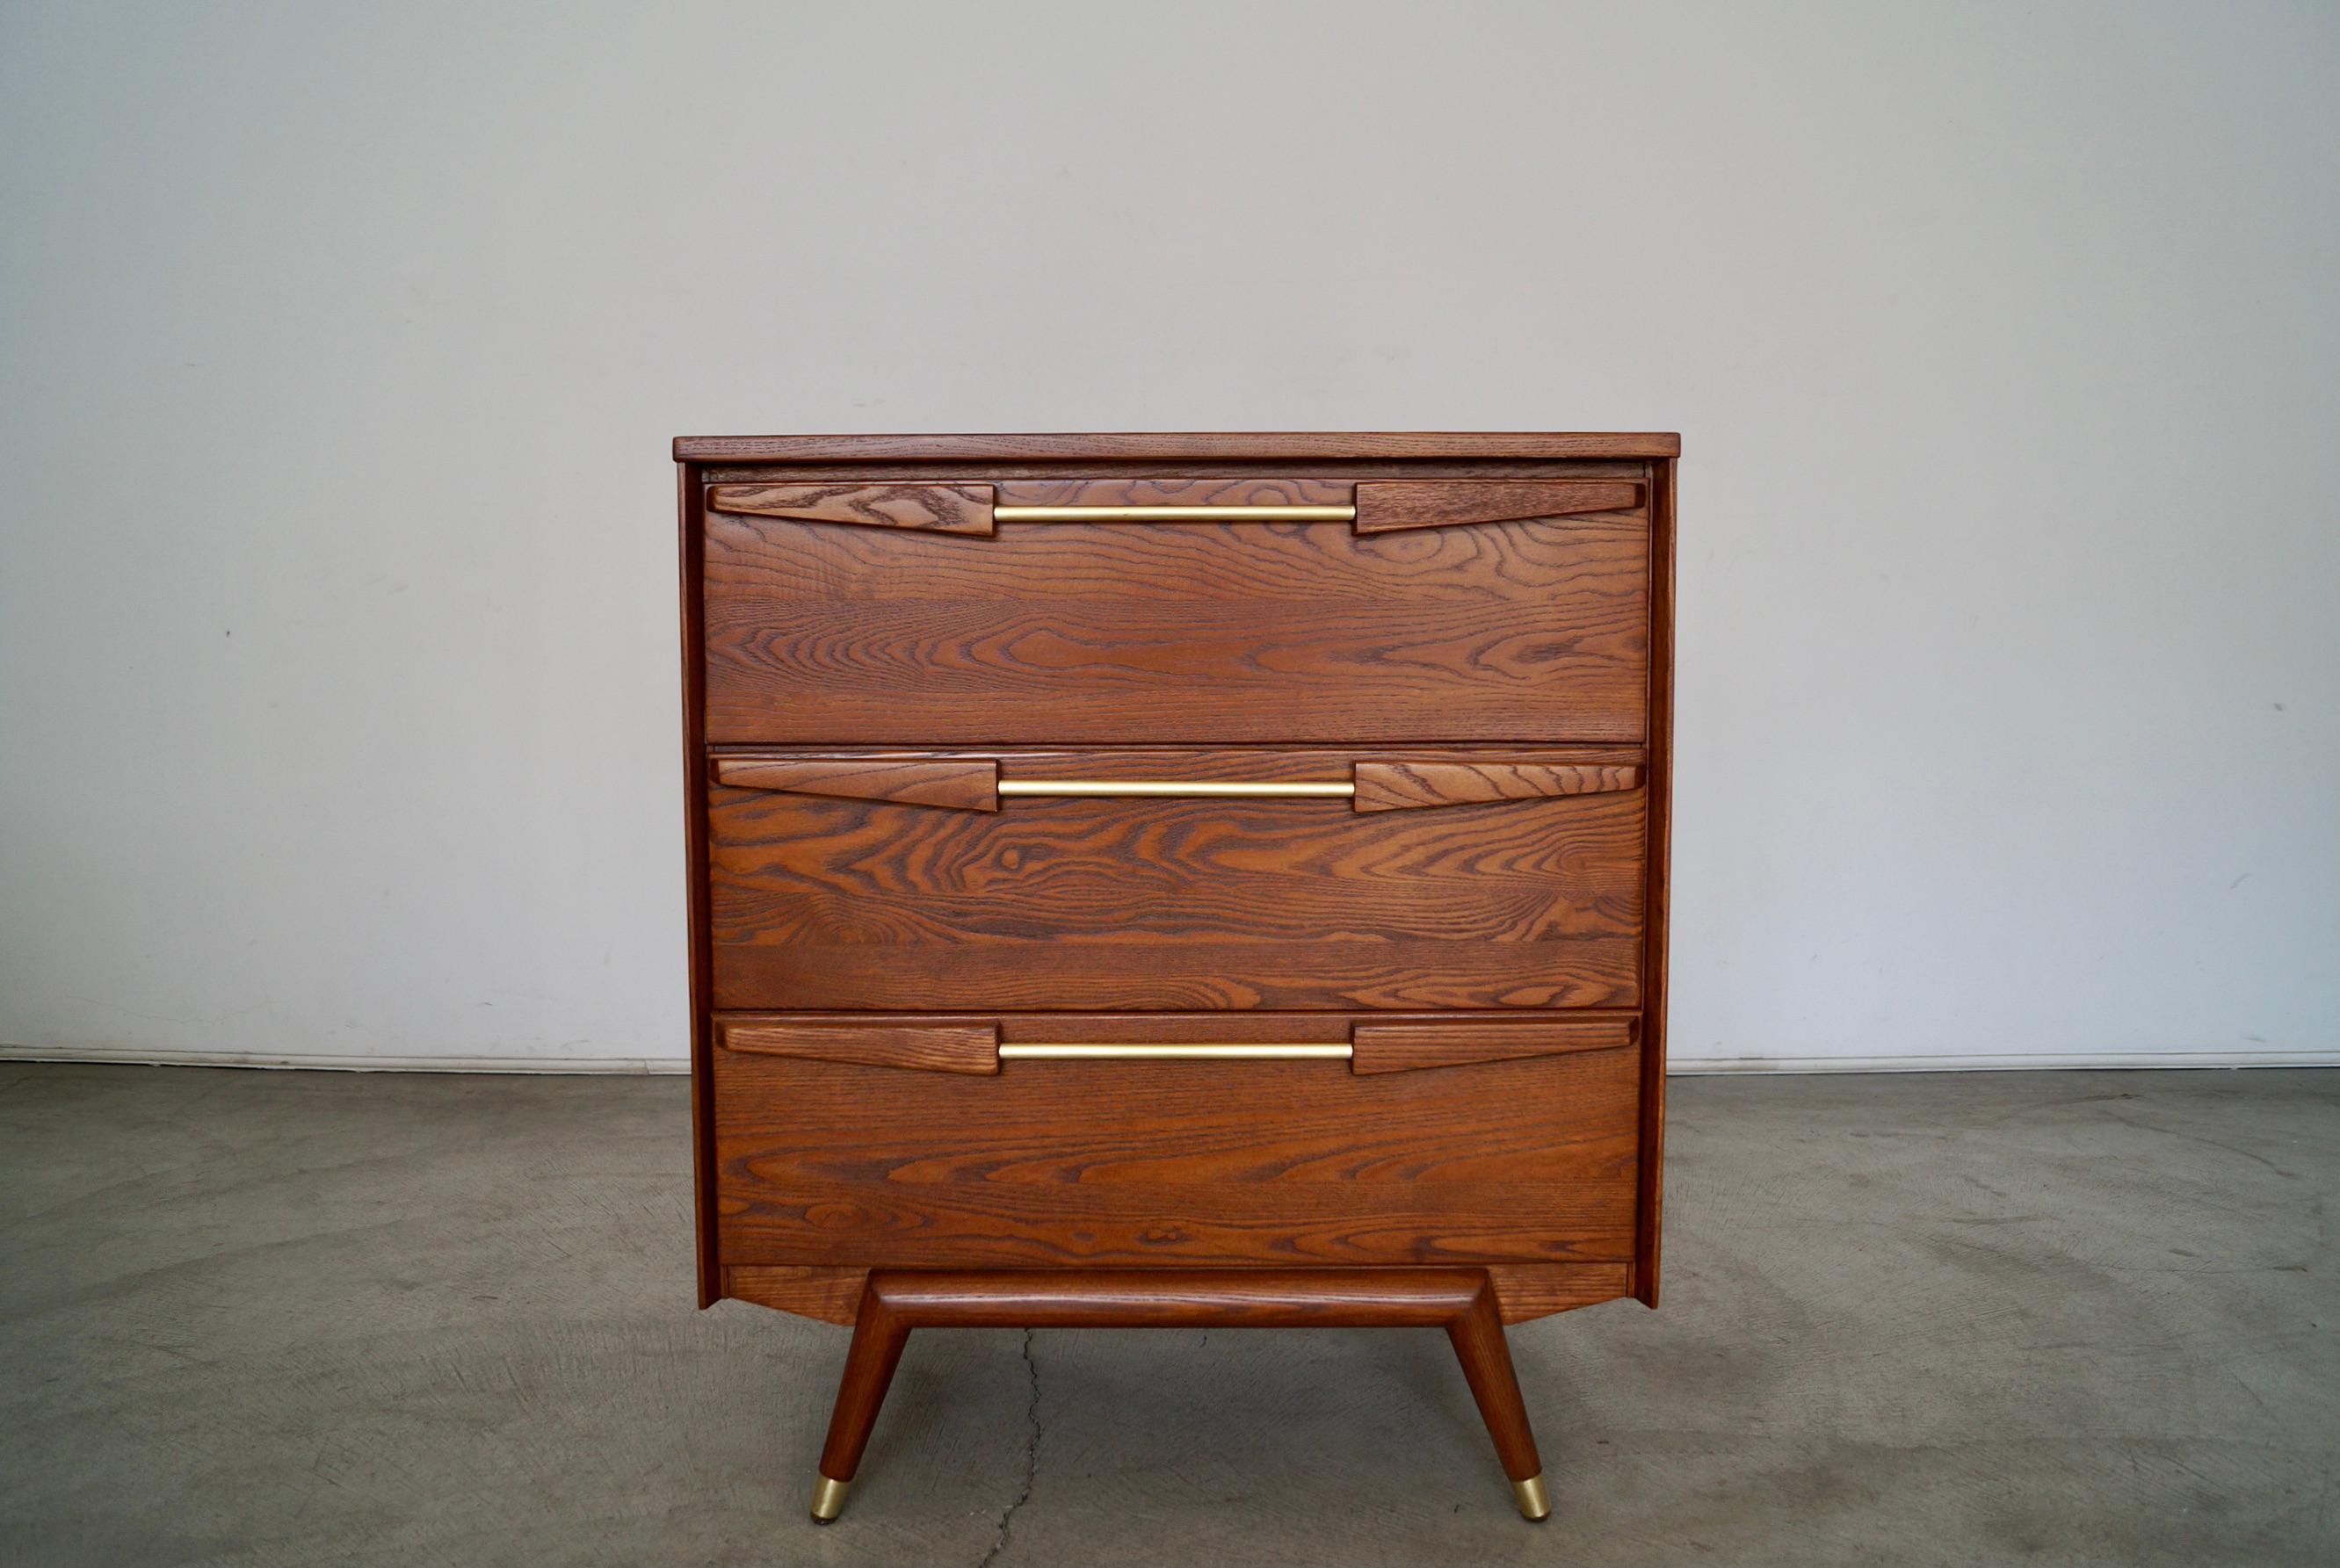 Mid-Century Modern dresser for sale. Made of solid ash and solid brass, and has been professionally refinished in walnut. It's really well made and solid, and has an incredible design. The interior of the drawers are metal. There is absolutely no